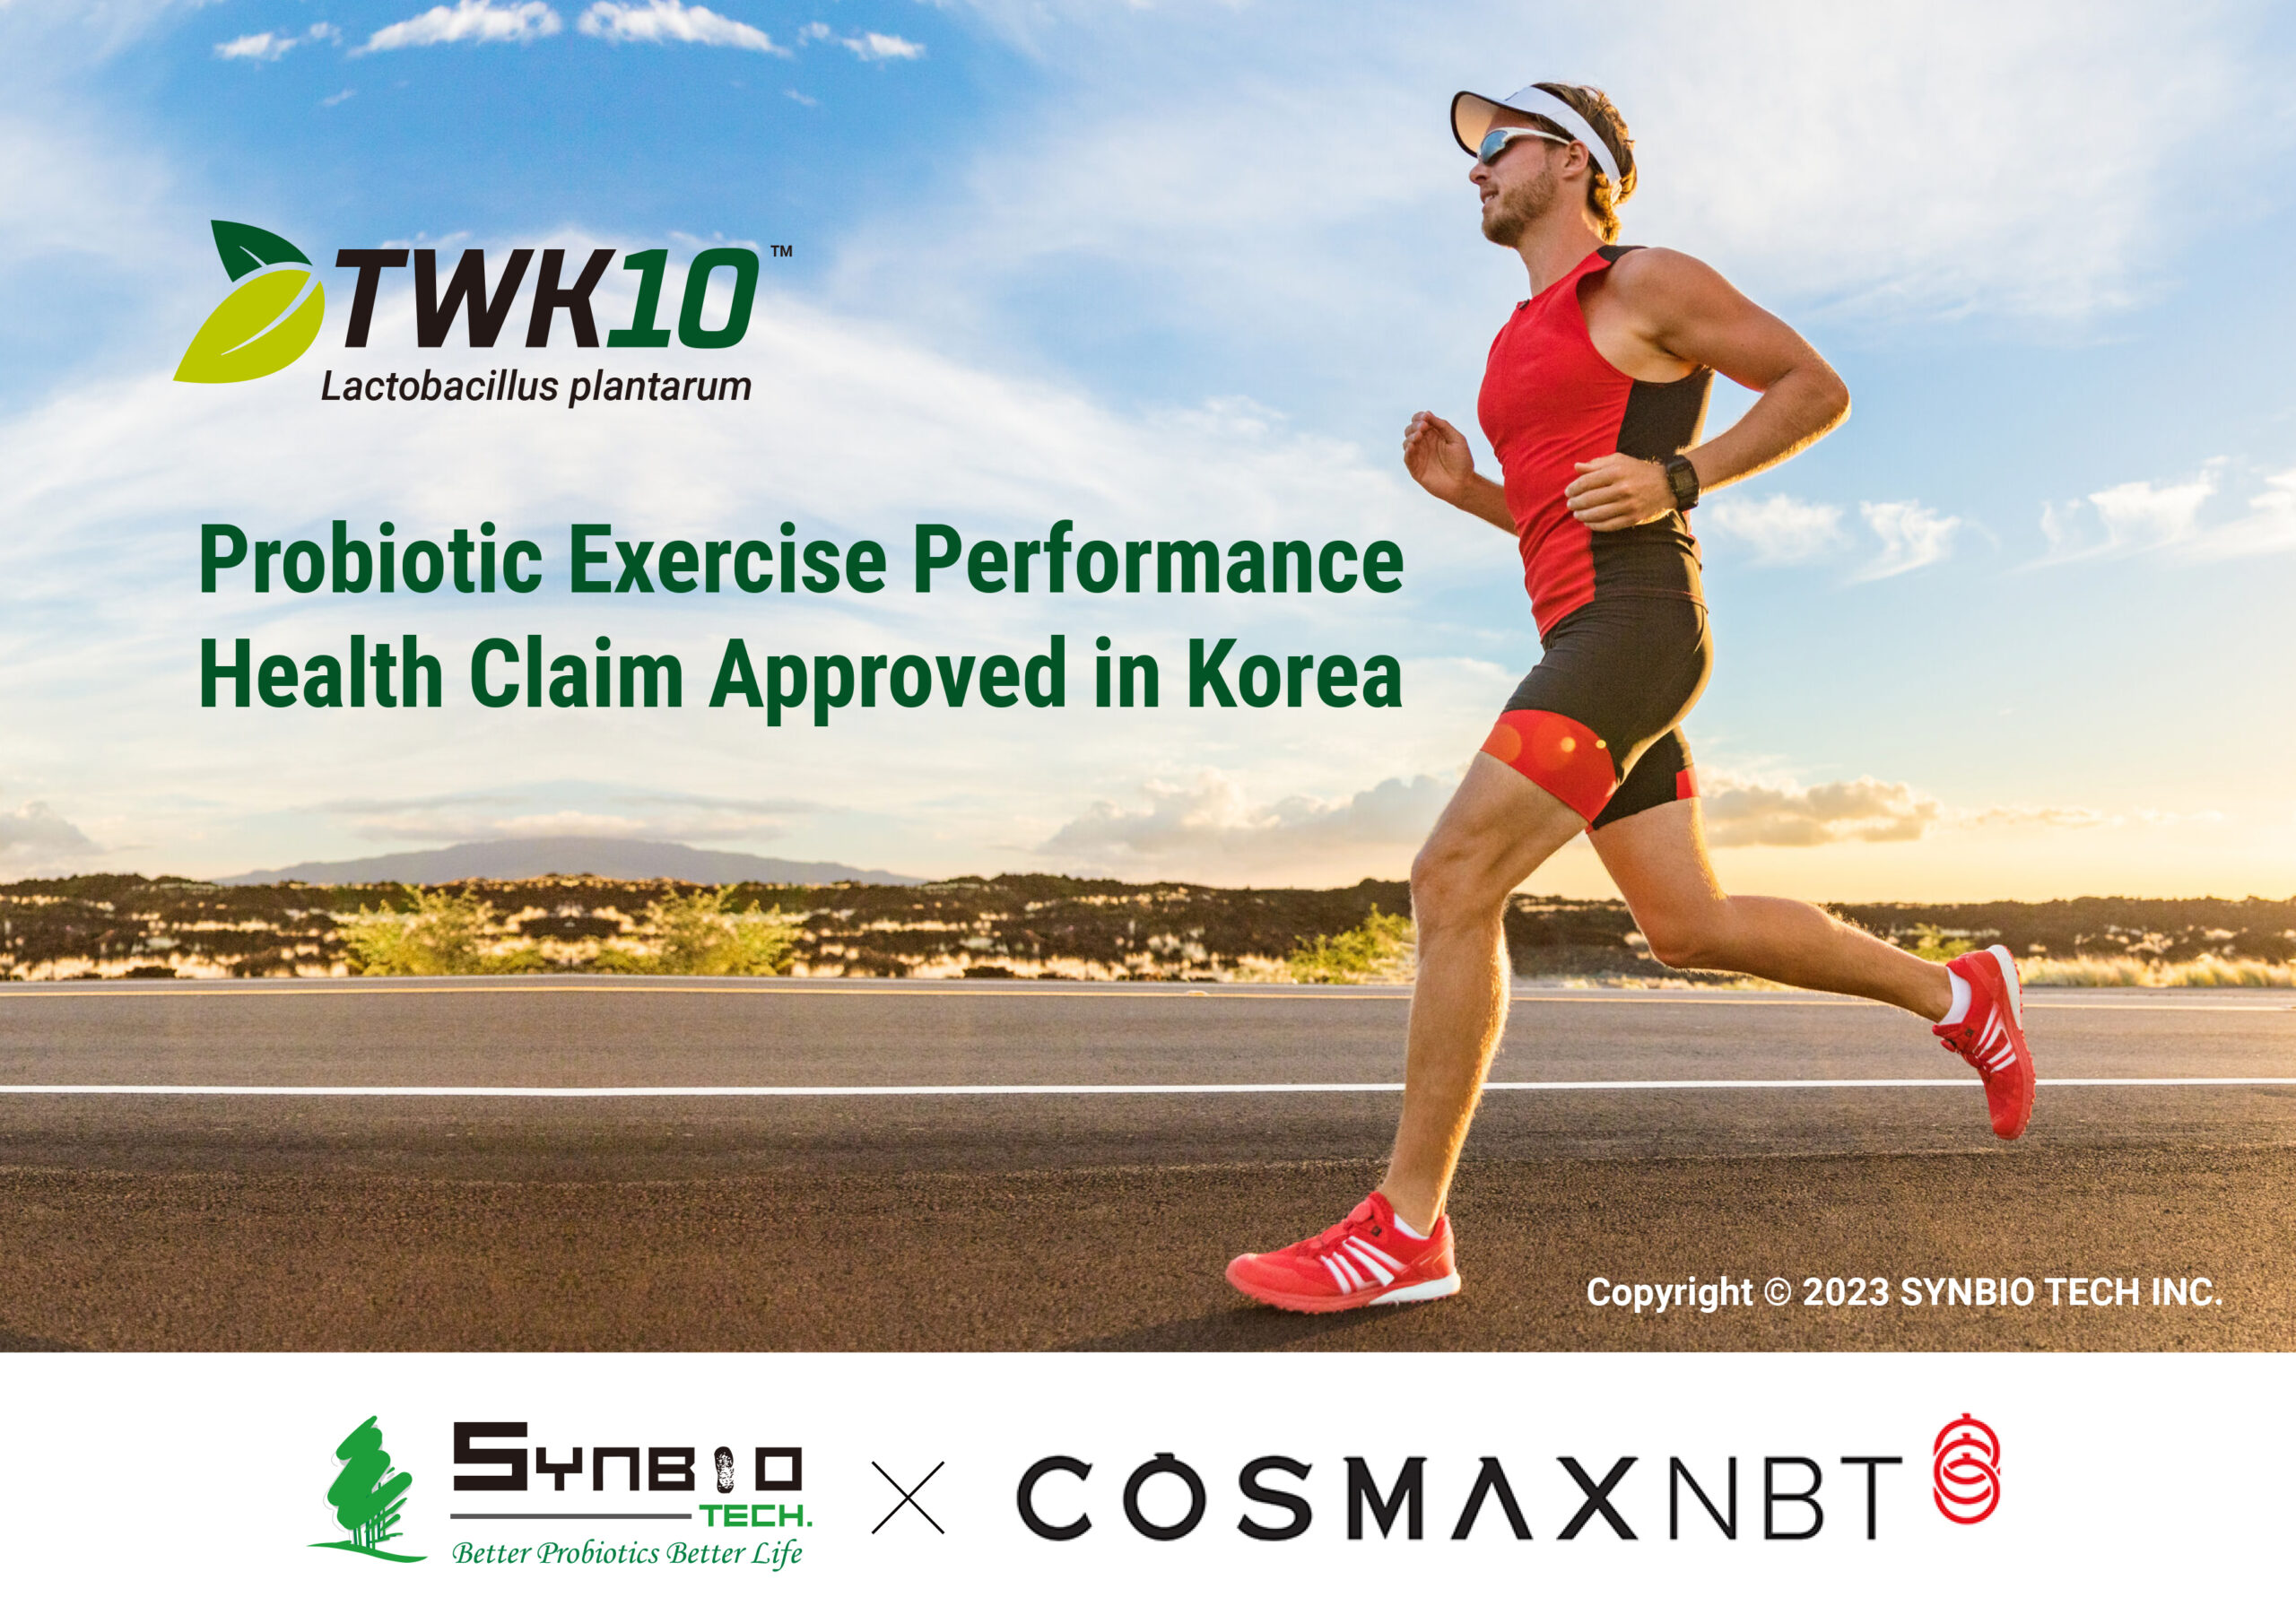 Cosmax and synbiotech exclusive cooperation agreement-TWK10